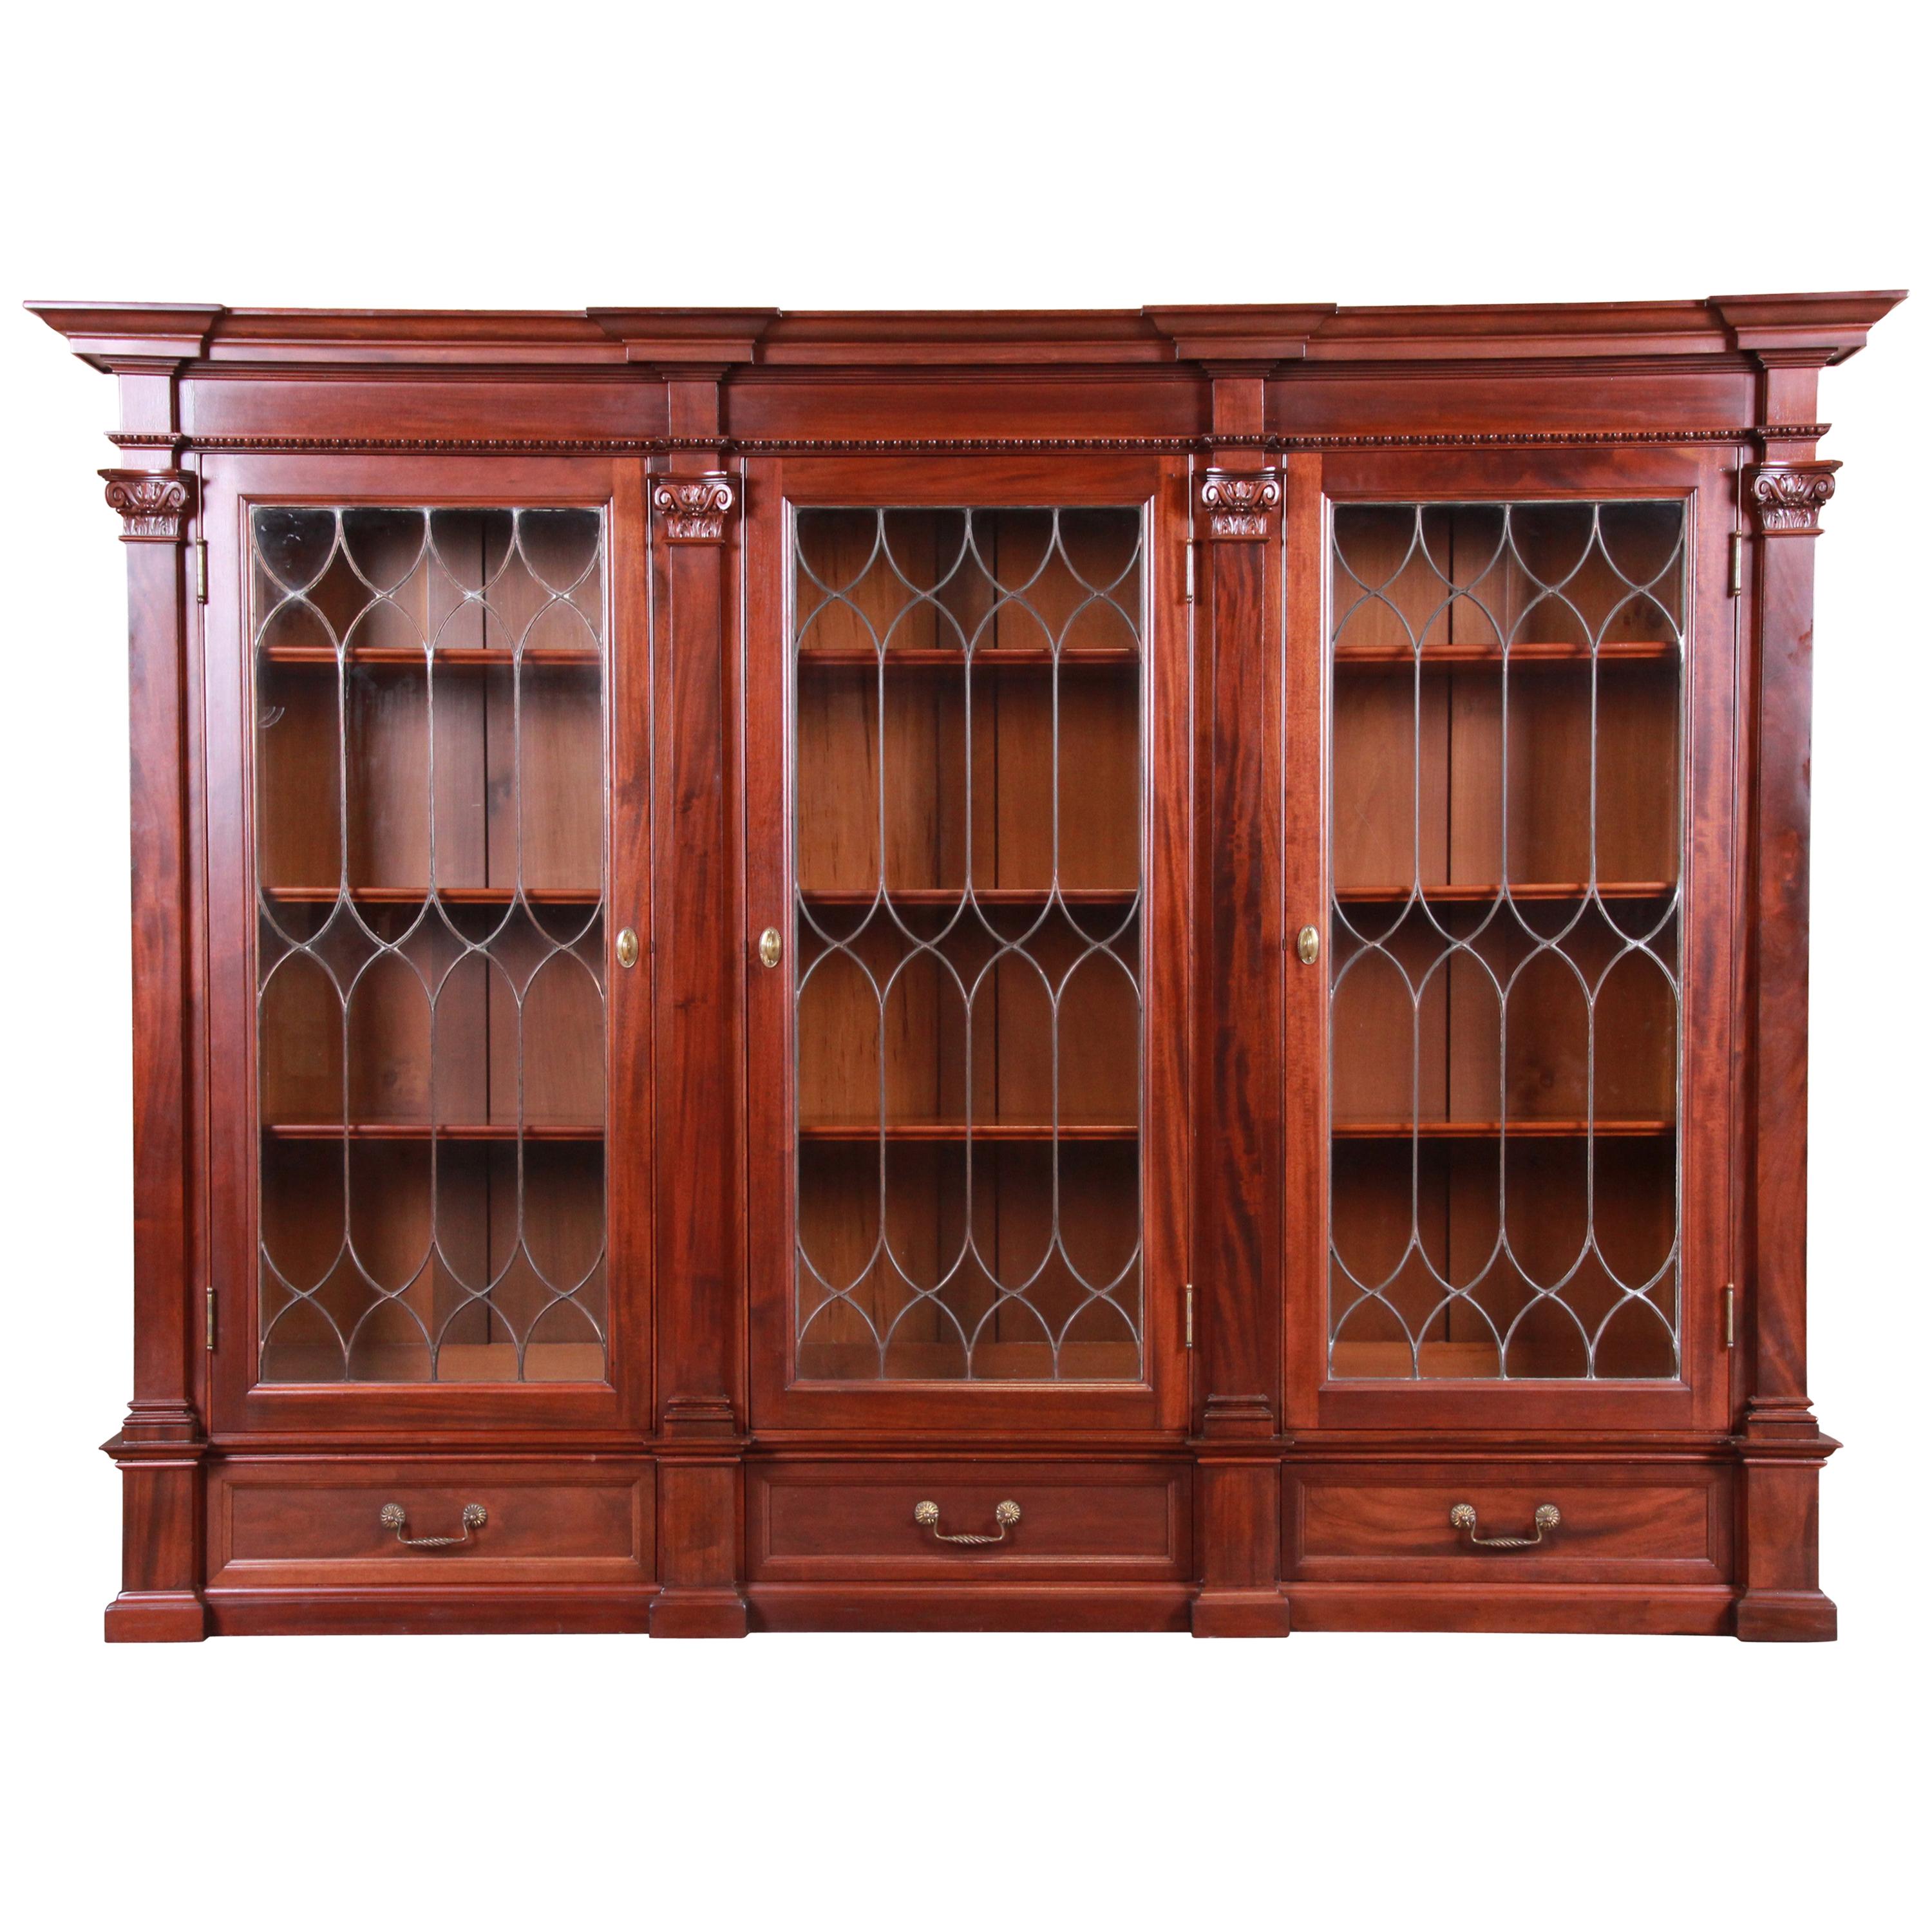 Monumental 19th Century Mahogany and Leaded Glass Triple Bookcase, Restored